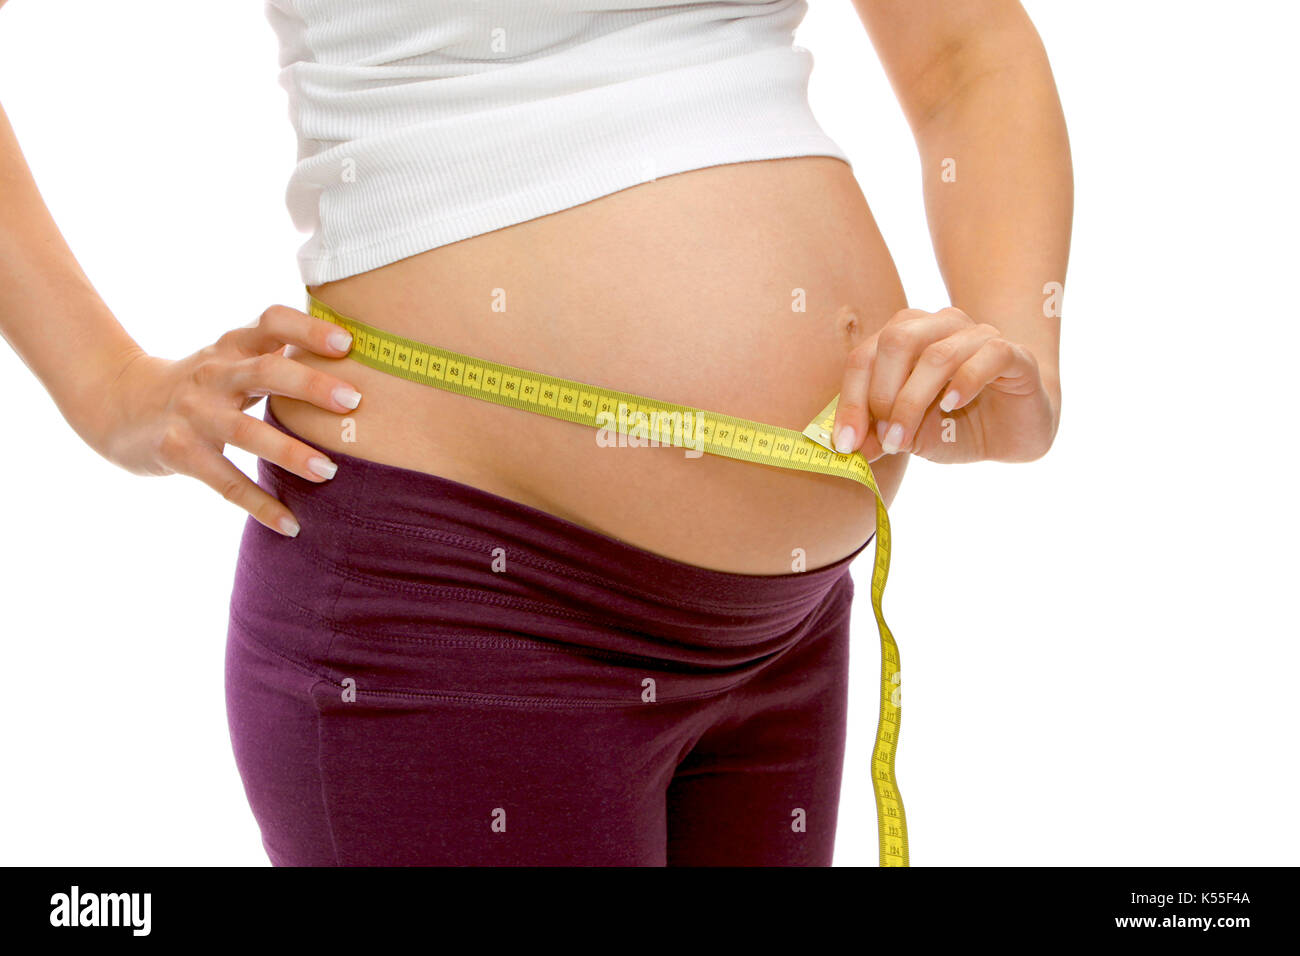 Pregnant woman with measuring tape, measures her belly circumference Stock Photo